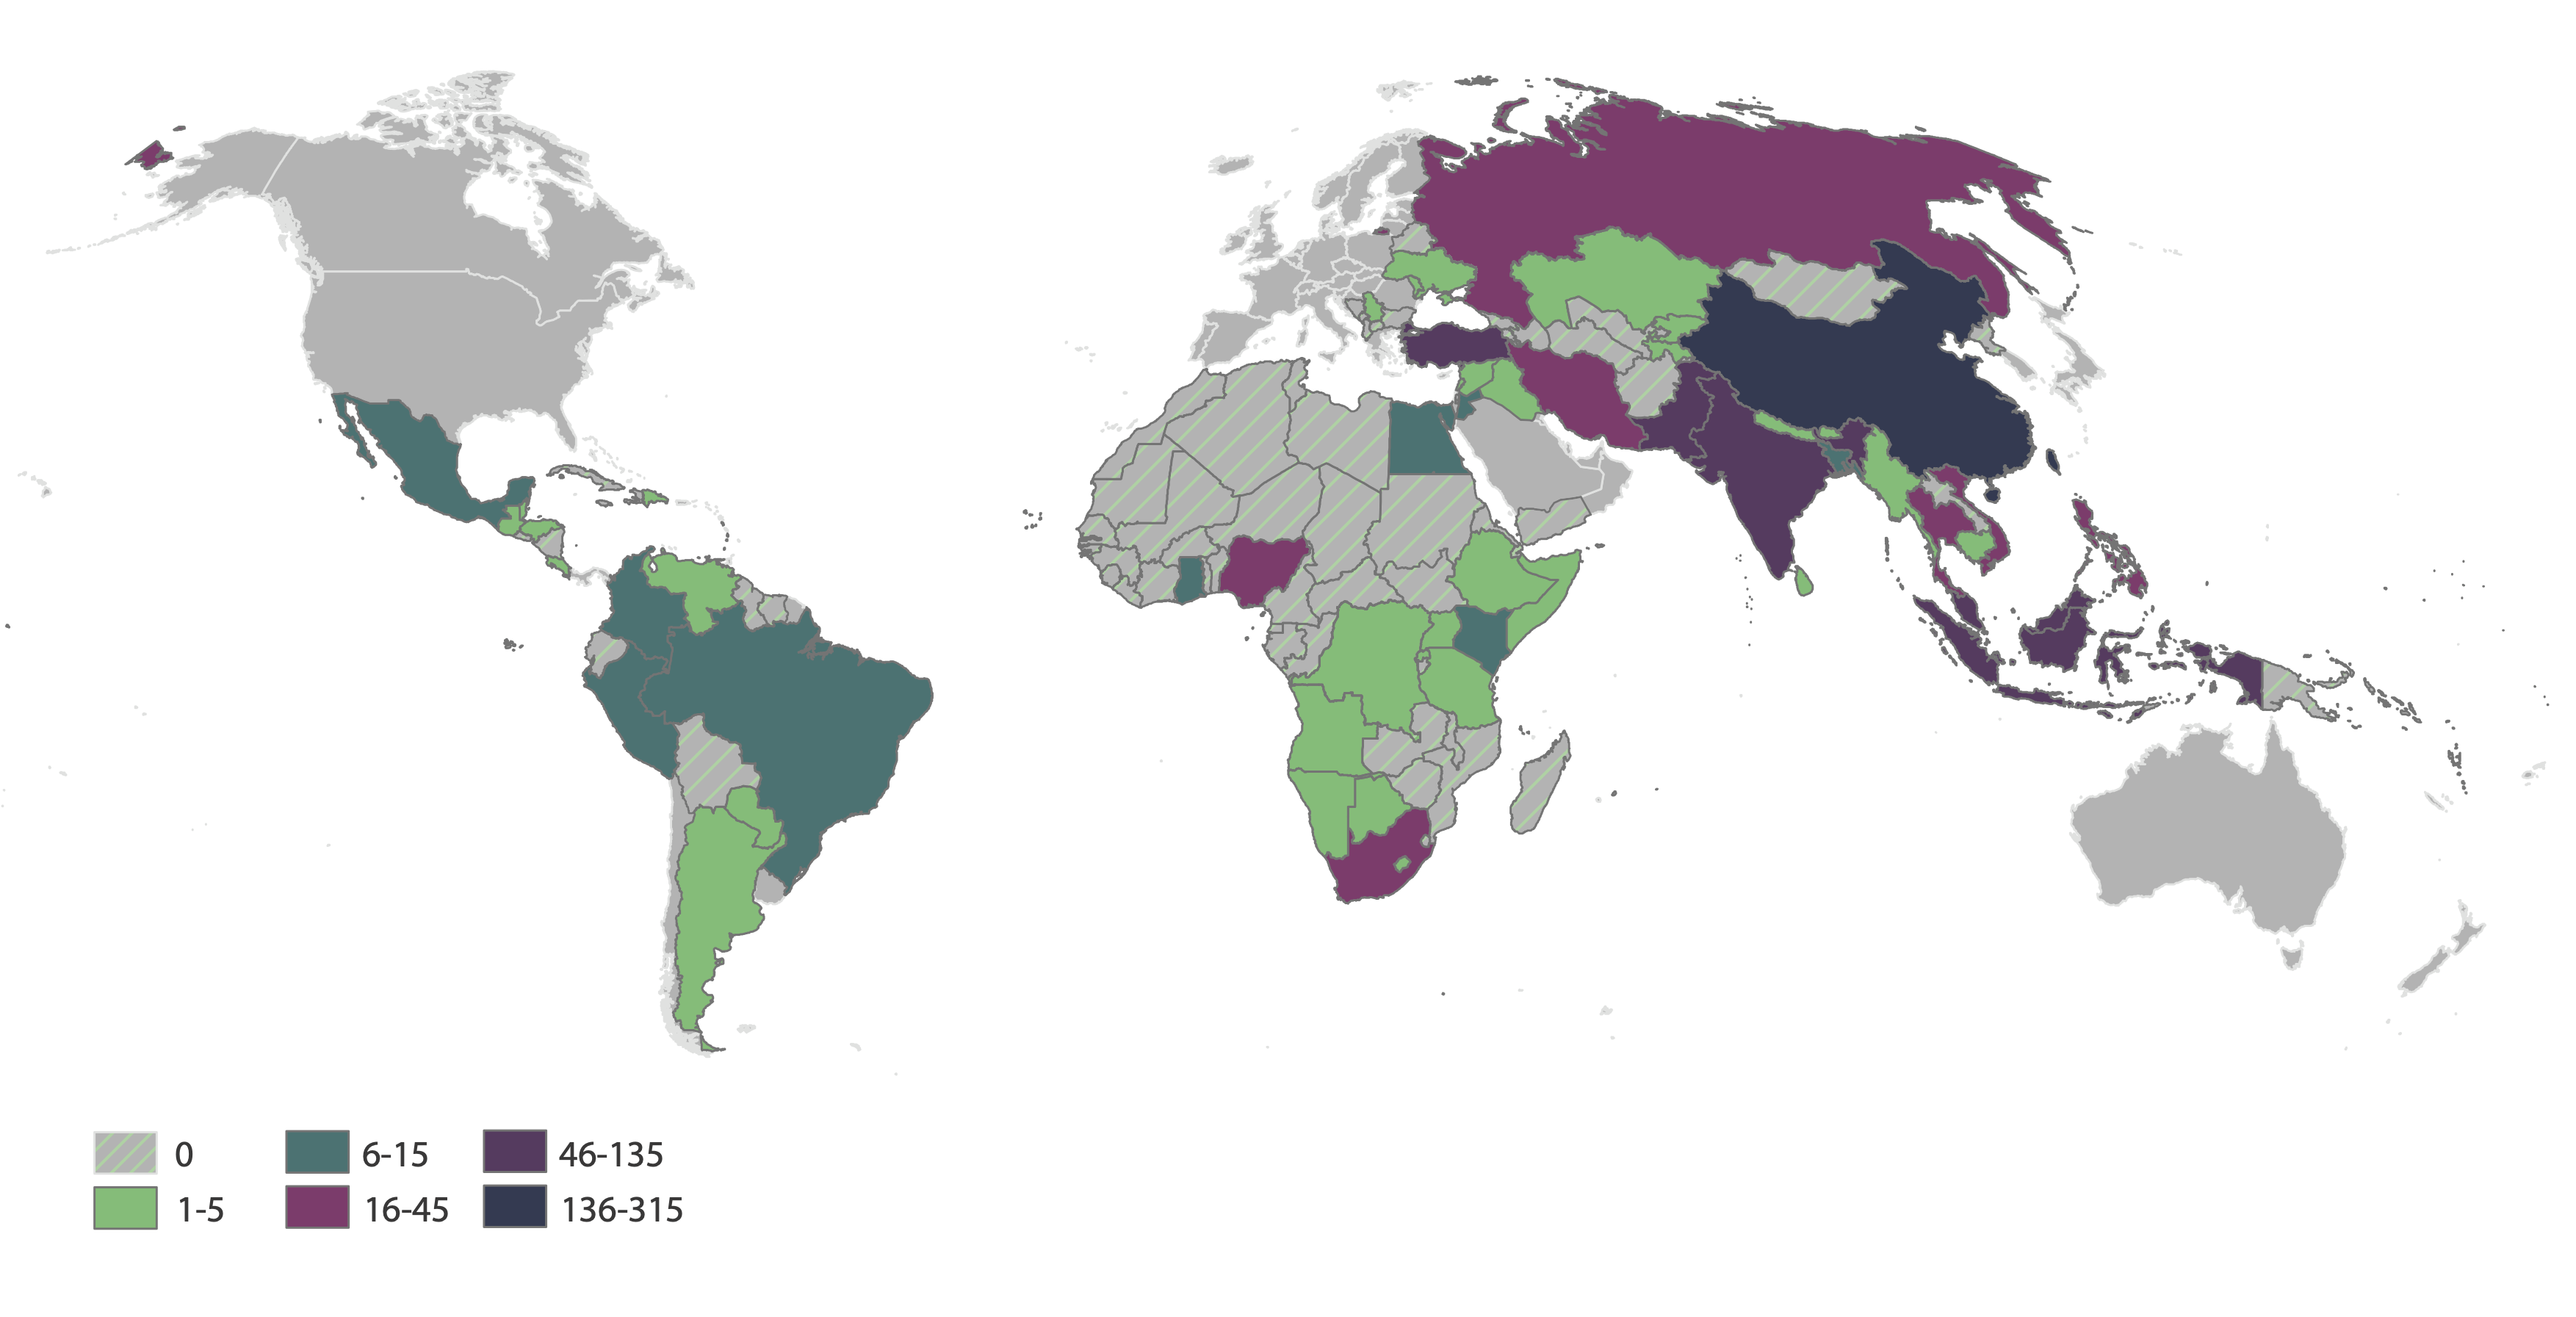 Character and Global Leadership Survey 2023 - Number of publications on character-based leadership in LMICs (1990-2022)